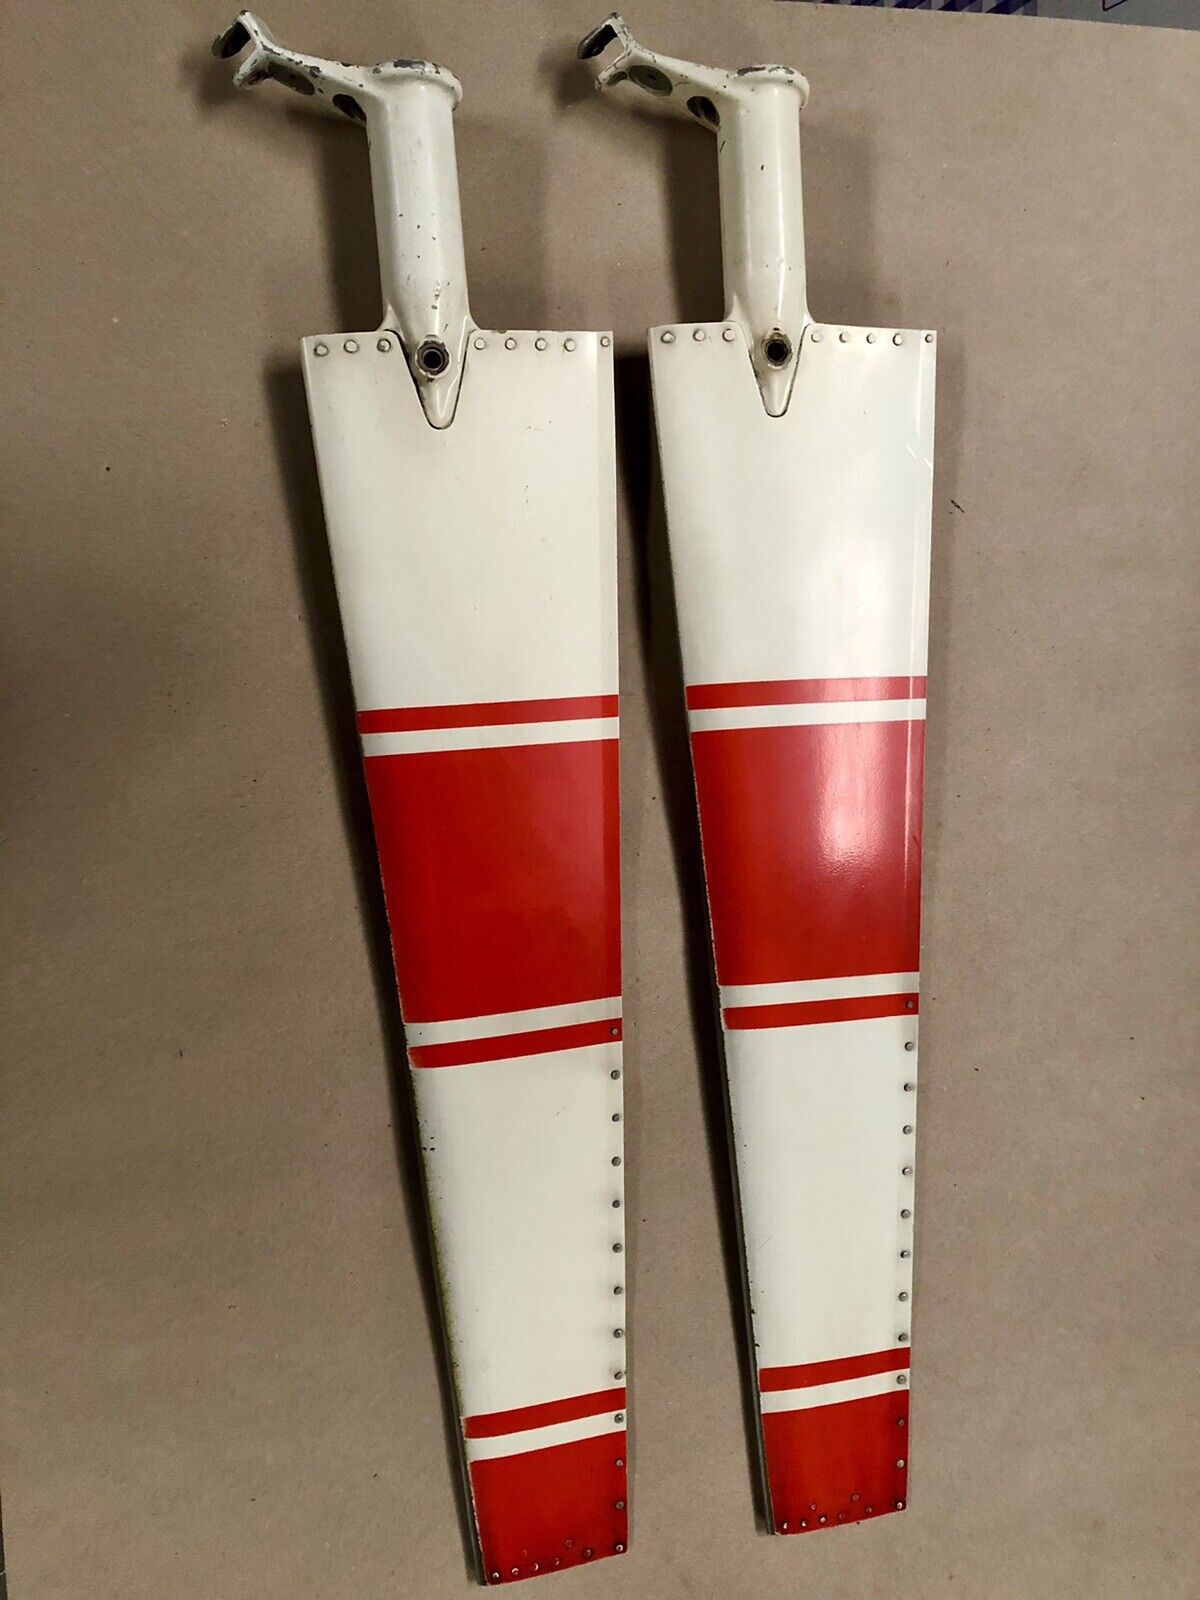 FH-1100 Helicopter, Tail Rotor Blade PN 24-55100-7 Display Only.